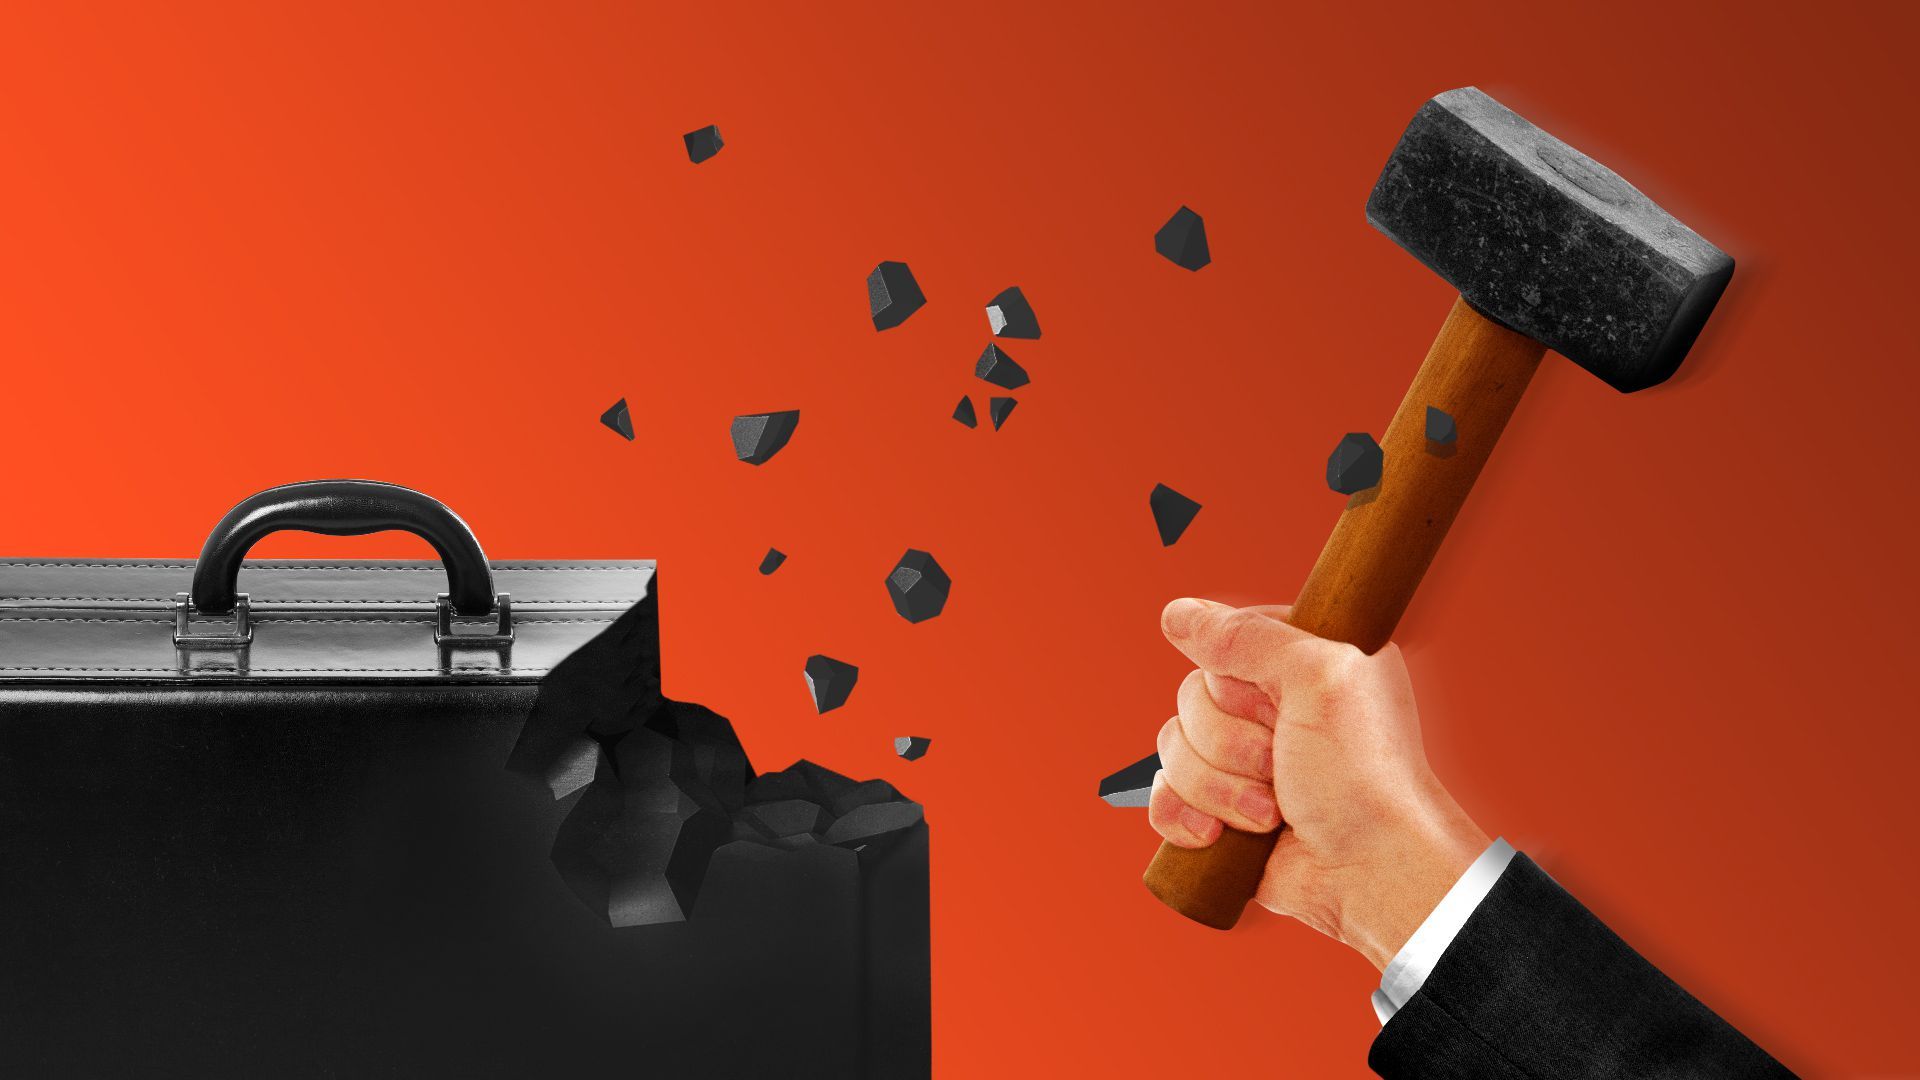 Illustration of a hand holding a hammer breaking away pieces of a briefcase. 